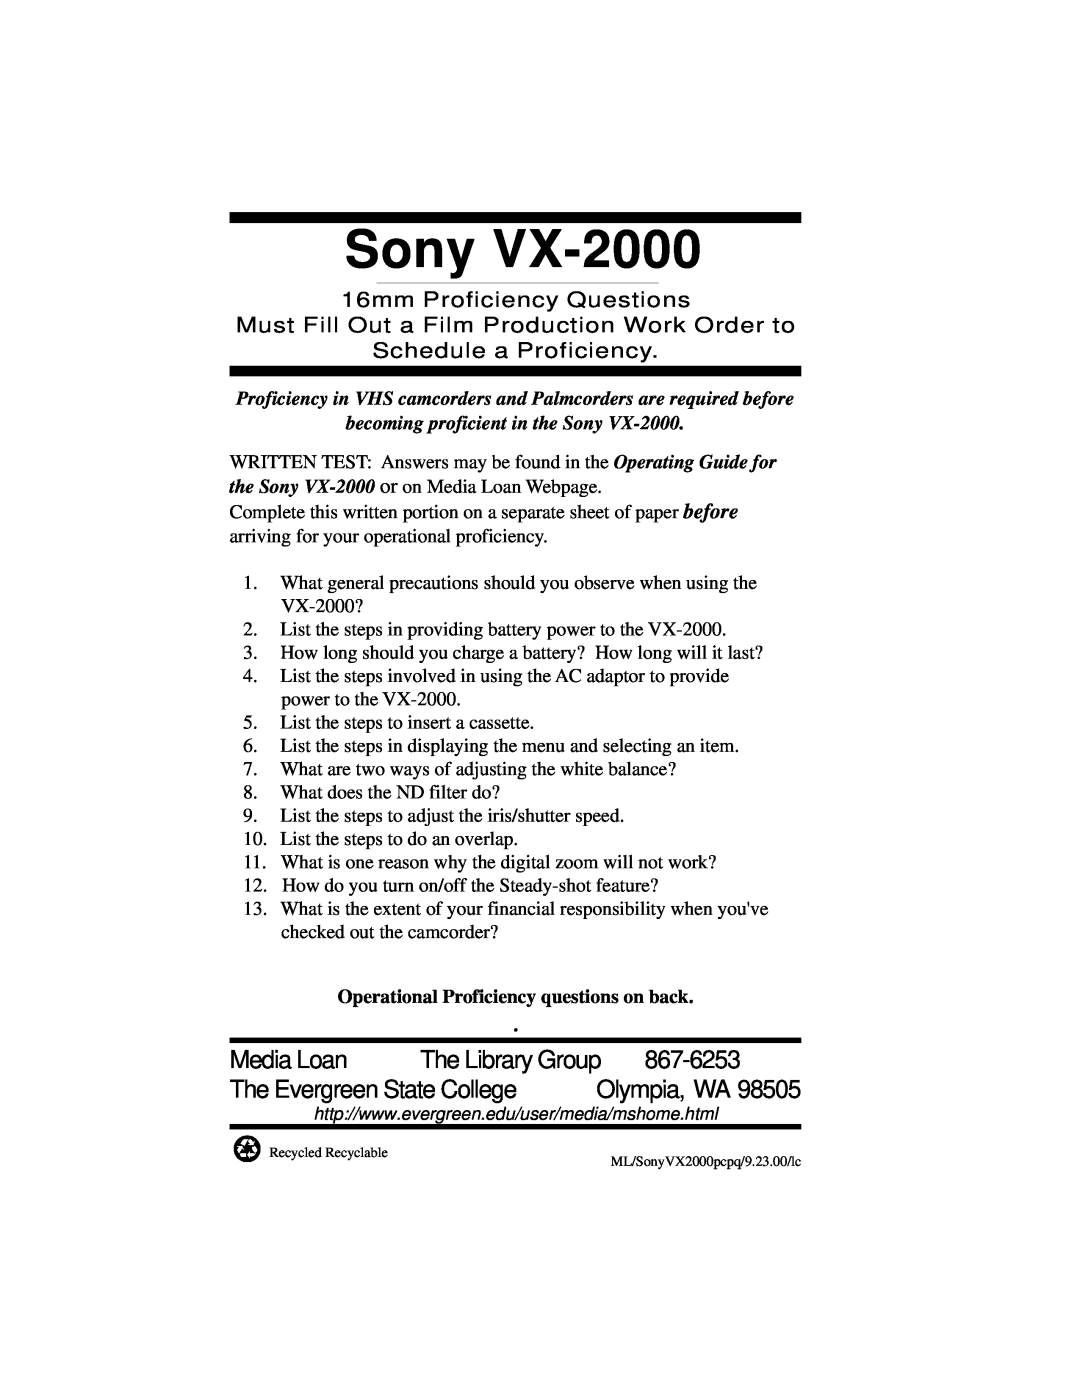 Sony VX-2000 specifications Olympia, WA, 98505, 16mm Proficiency Questions, Sony, 867-6253, before, Must Fill Out a Film 